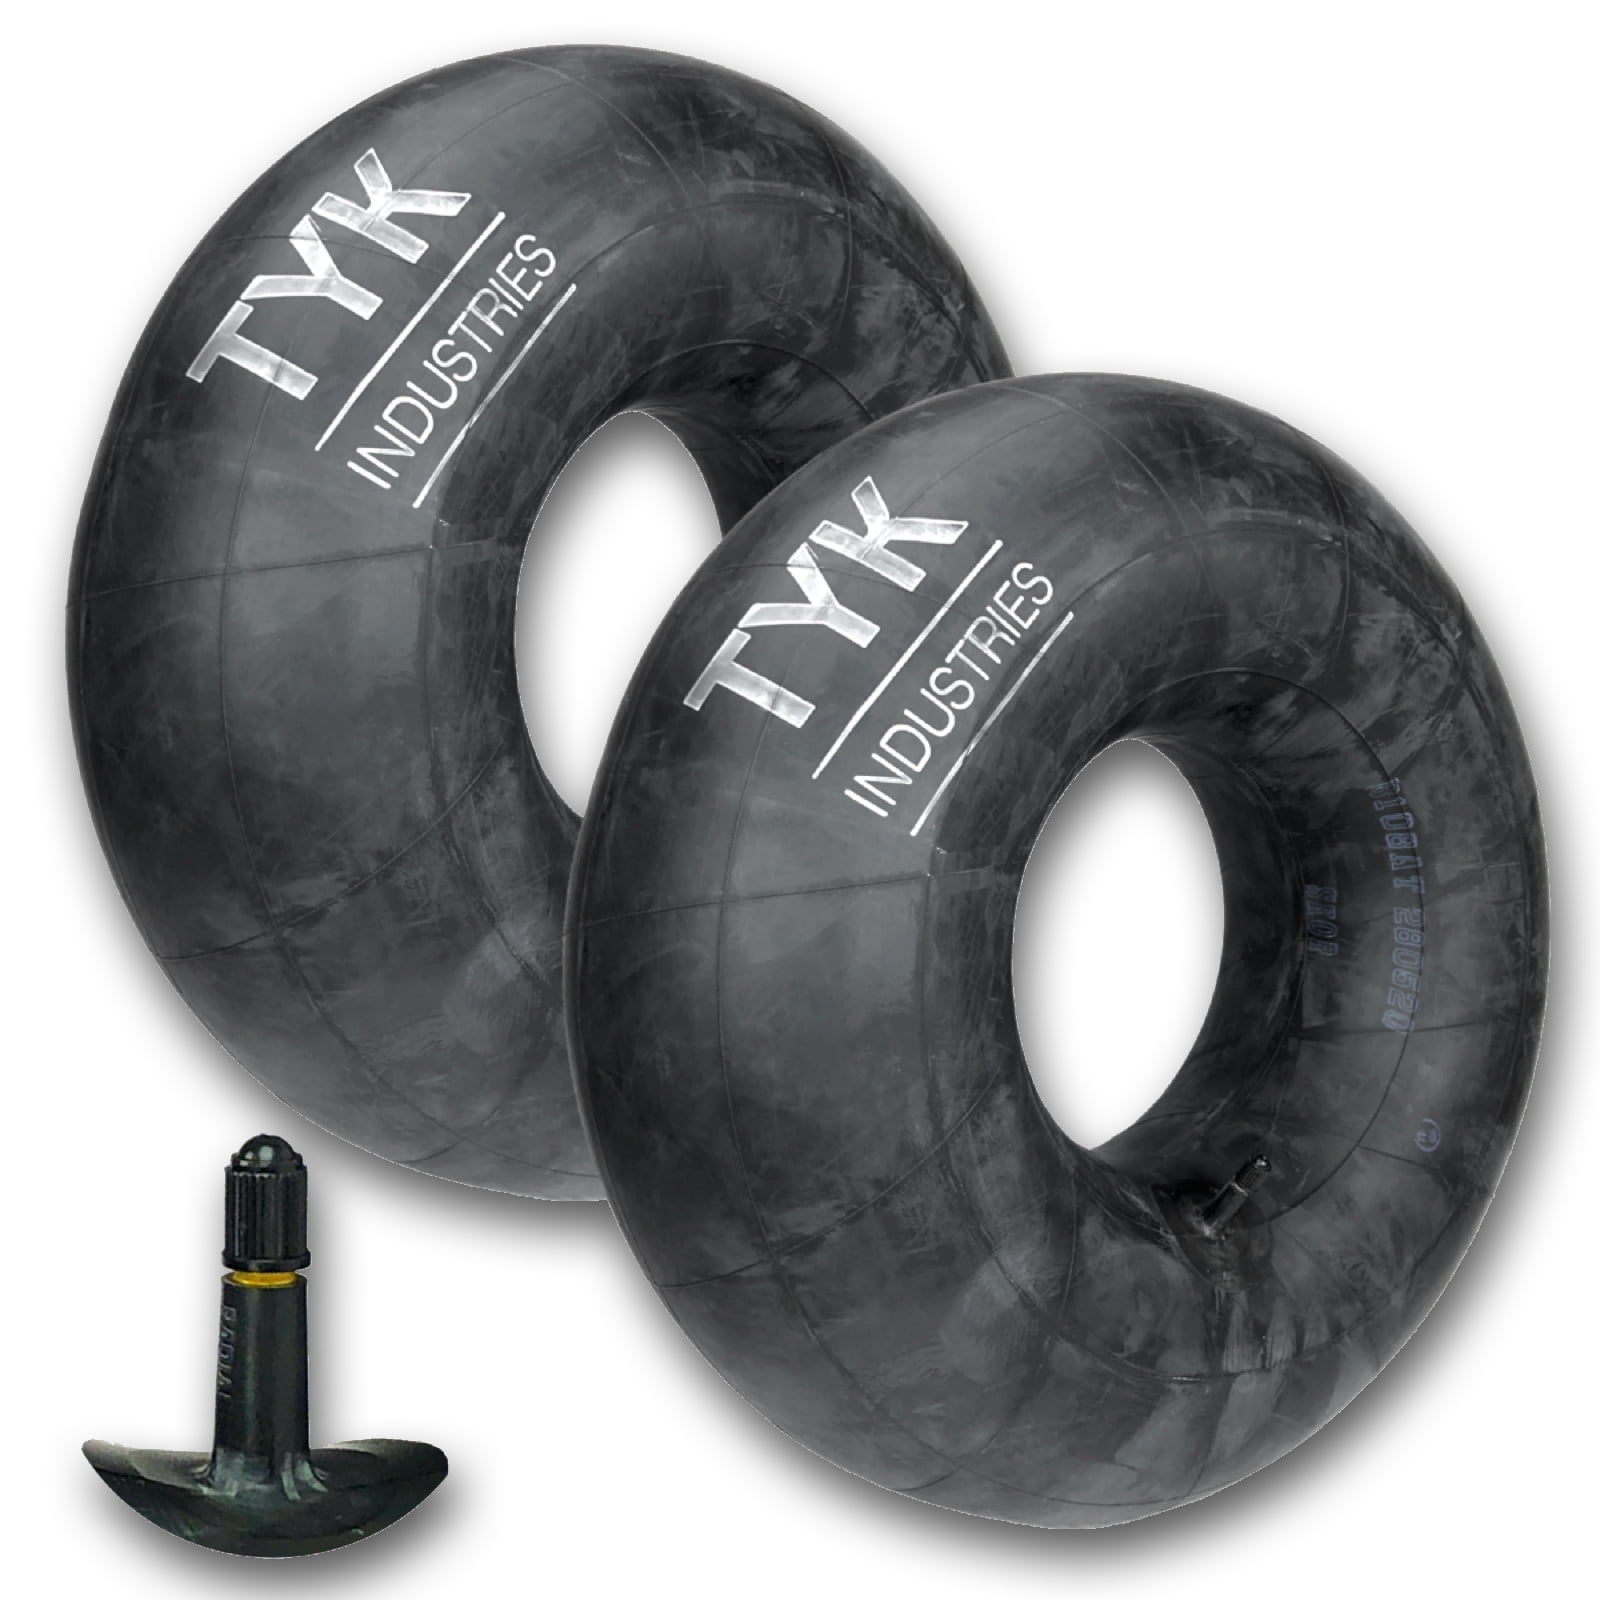 TWO Tire Inner Tubes fits 20X8.00-8 and 20X10.00-8 Lawn Tractor Mower Tire Tubes 